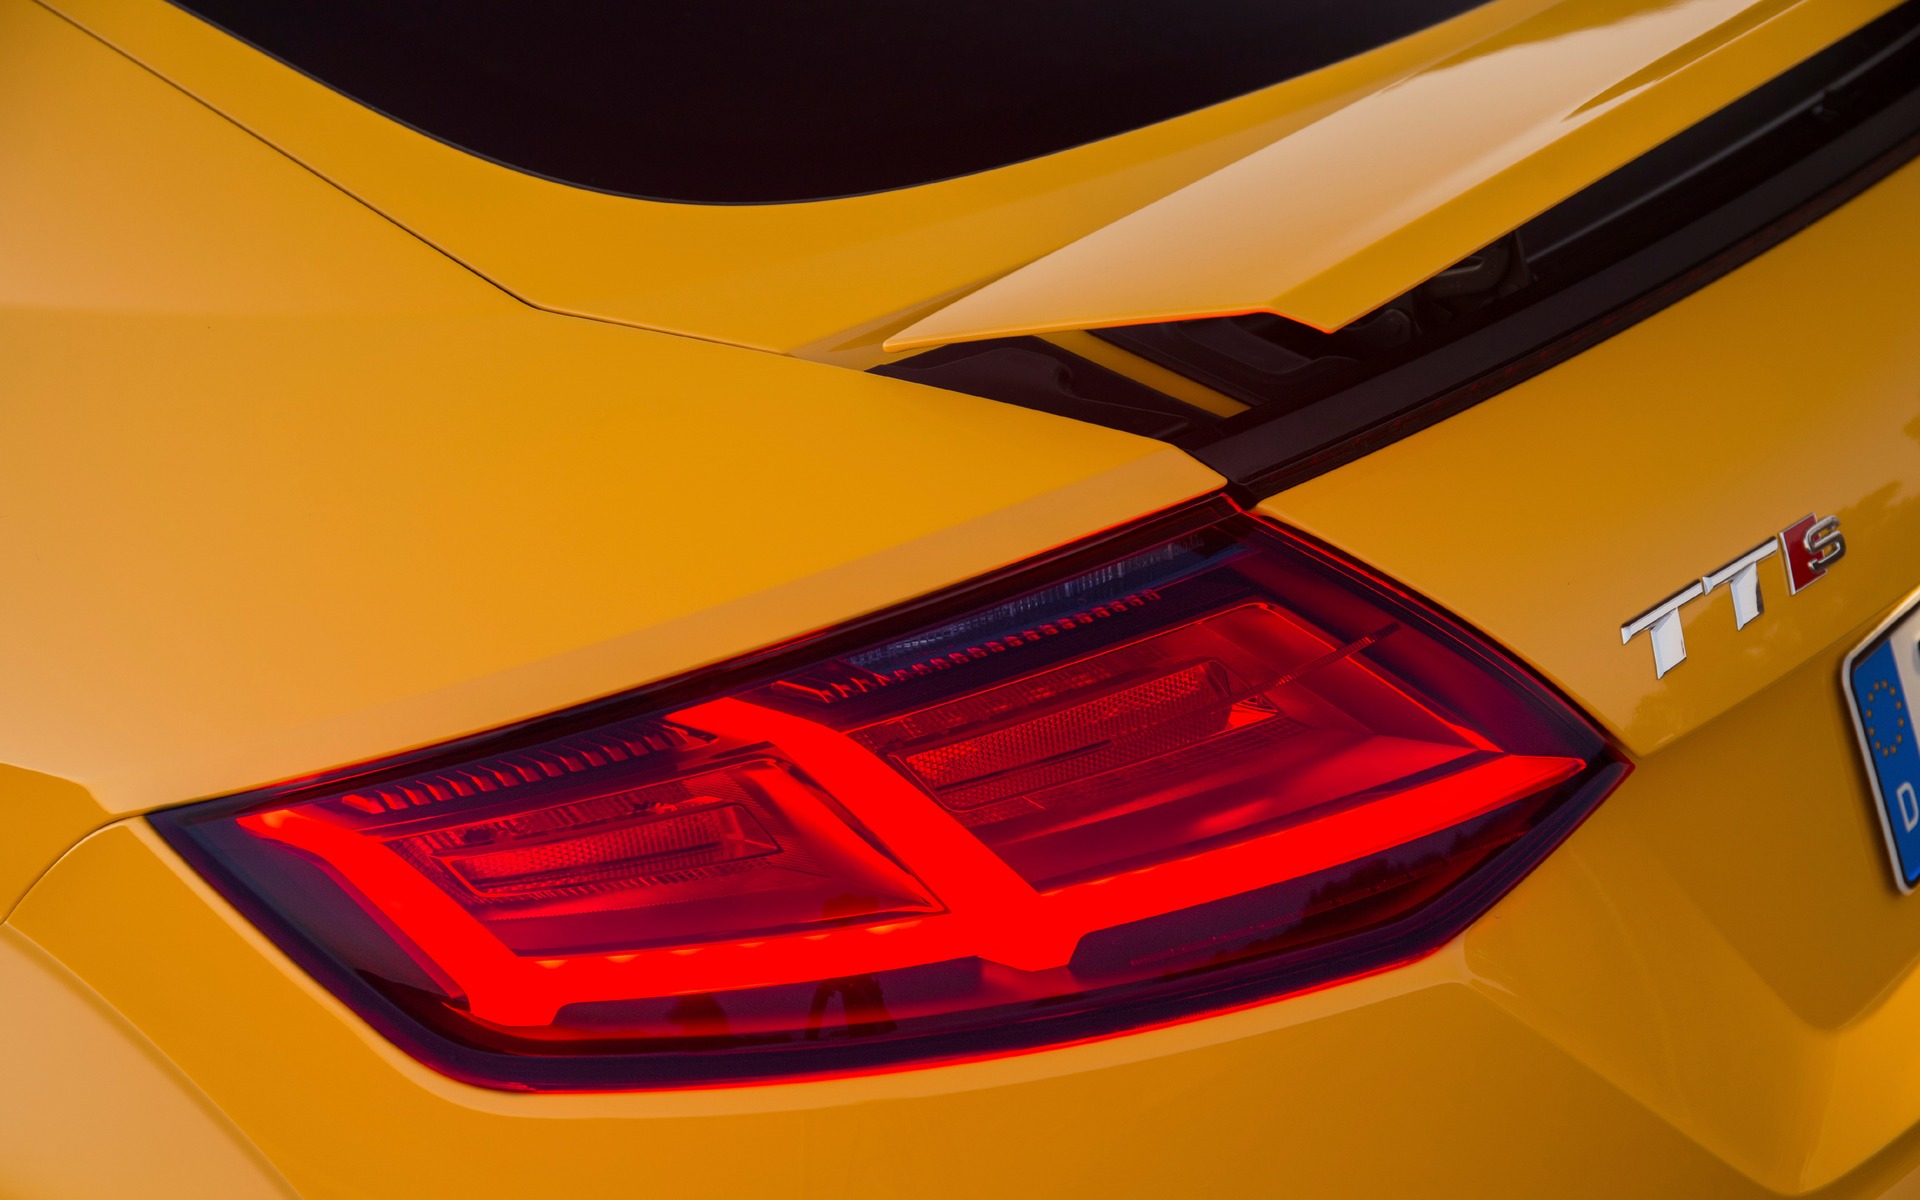 2016 Audi TTS - The rear spoiler deploys automatically at speed.